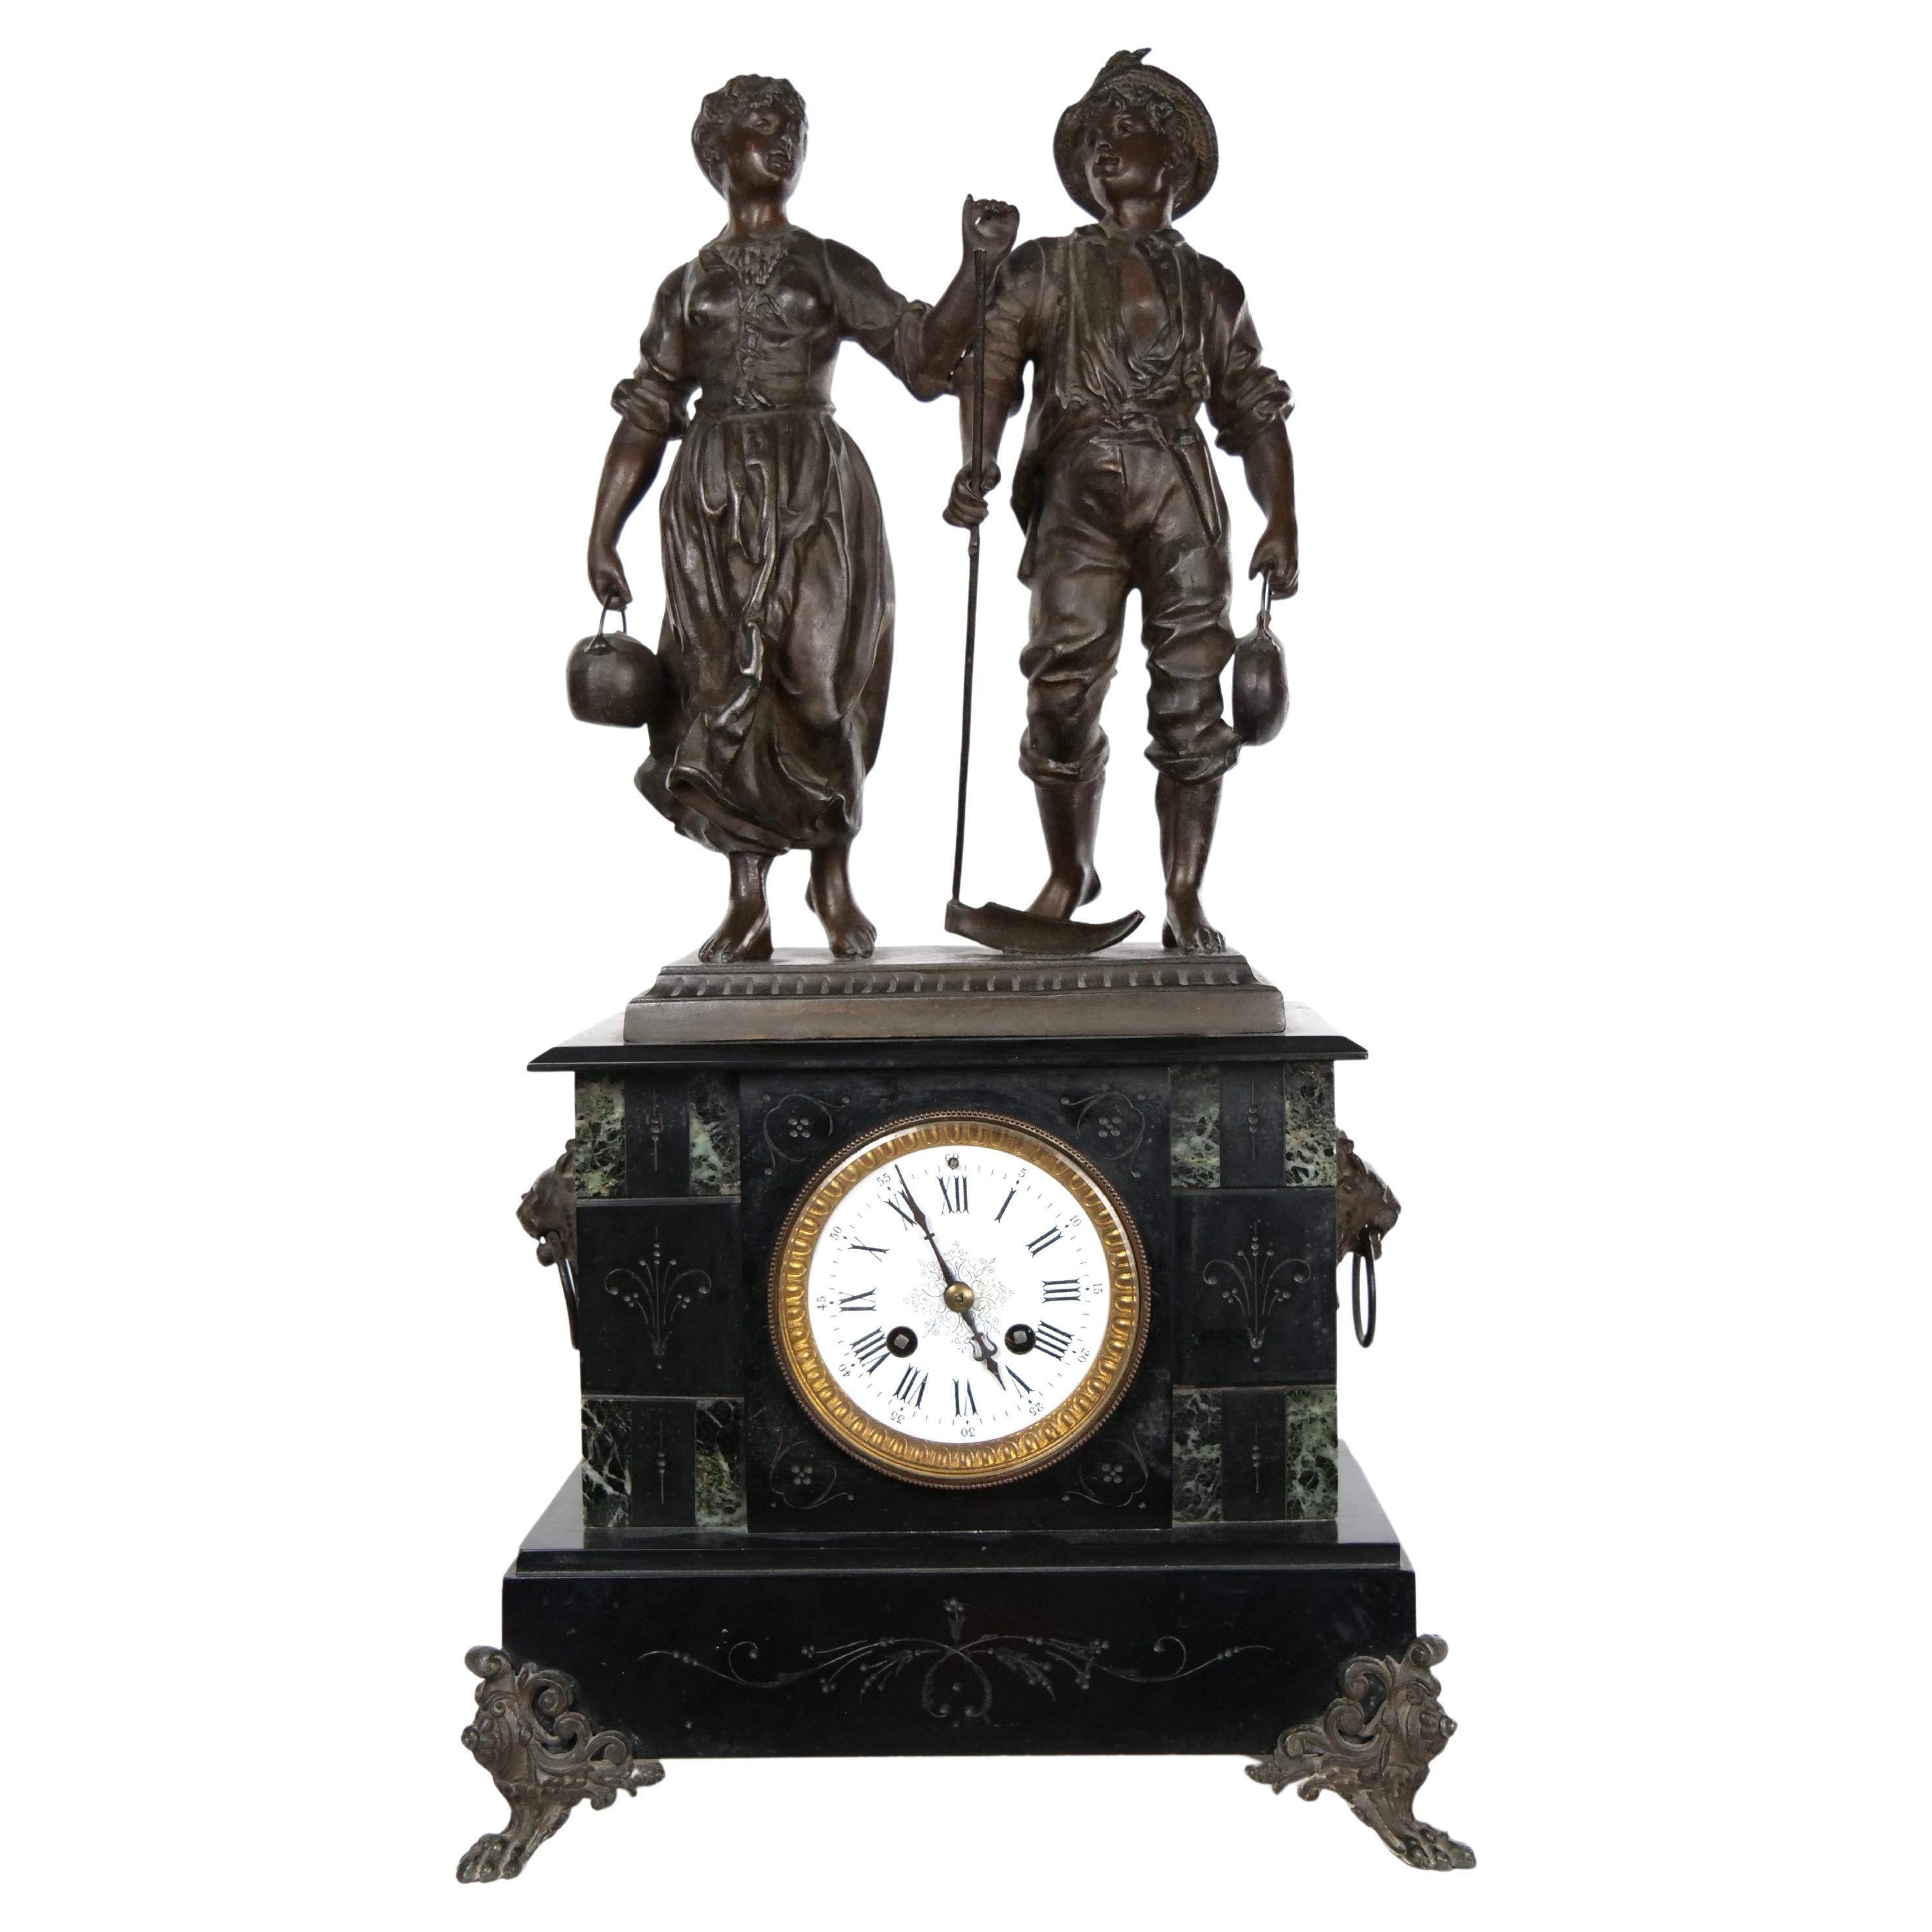 Mid 19th century marble and bronze Spelter three piece clock garniture set. Each piece is in good condition with appropriate wear consistent with age / use. The clock measure 23 inches high x 11 inches wide x 7 inches deep. Each side piece stands 17